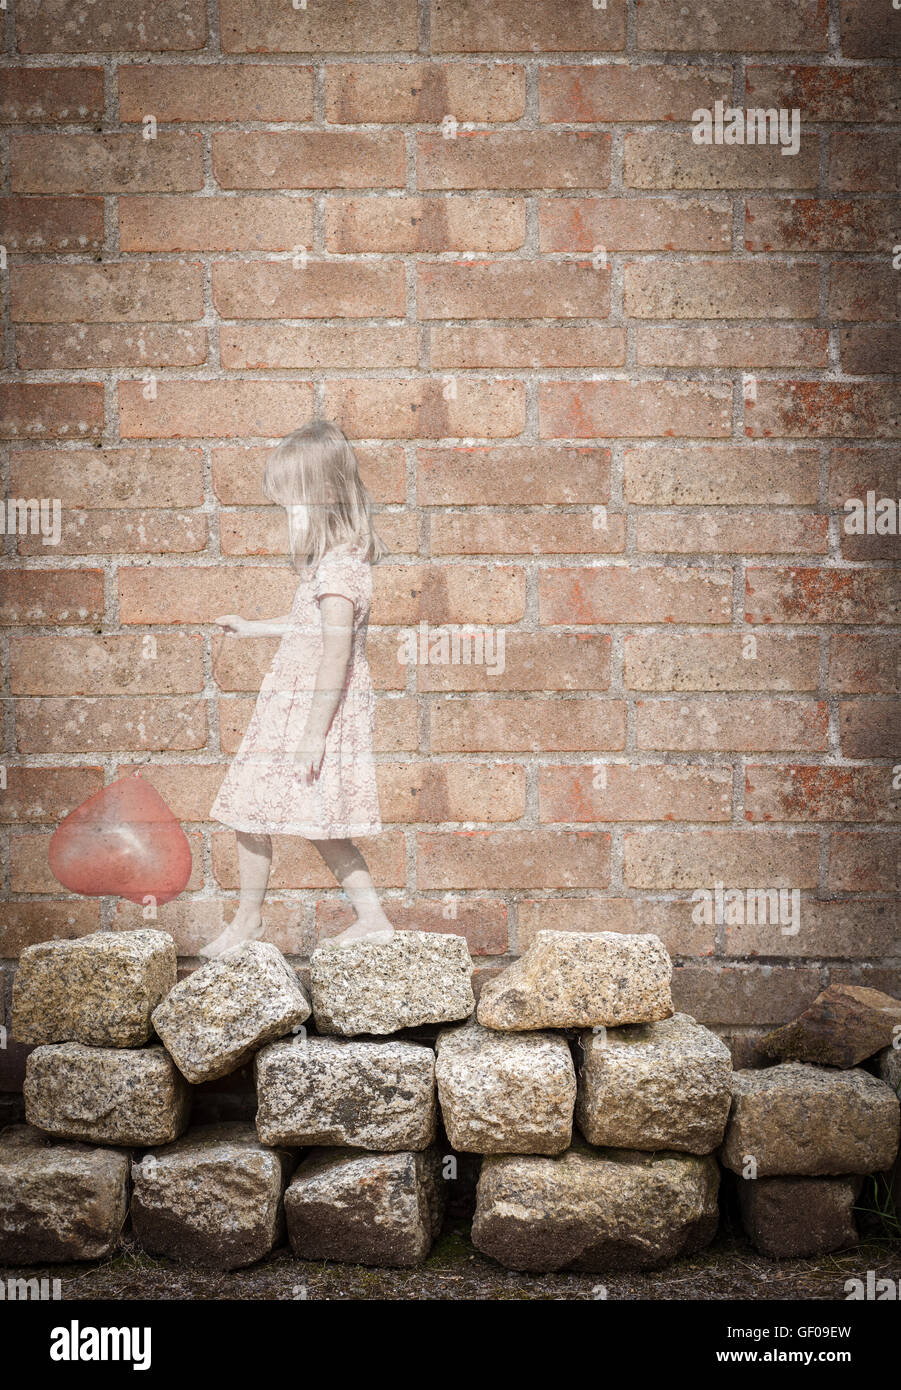 Pretty little girl holding red heart balloon. Ethereal opaque with grunge brick wall. Love childhood memories loneliness concept Stock Photo